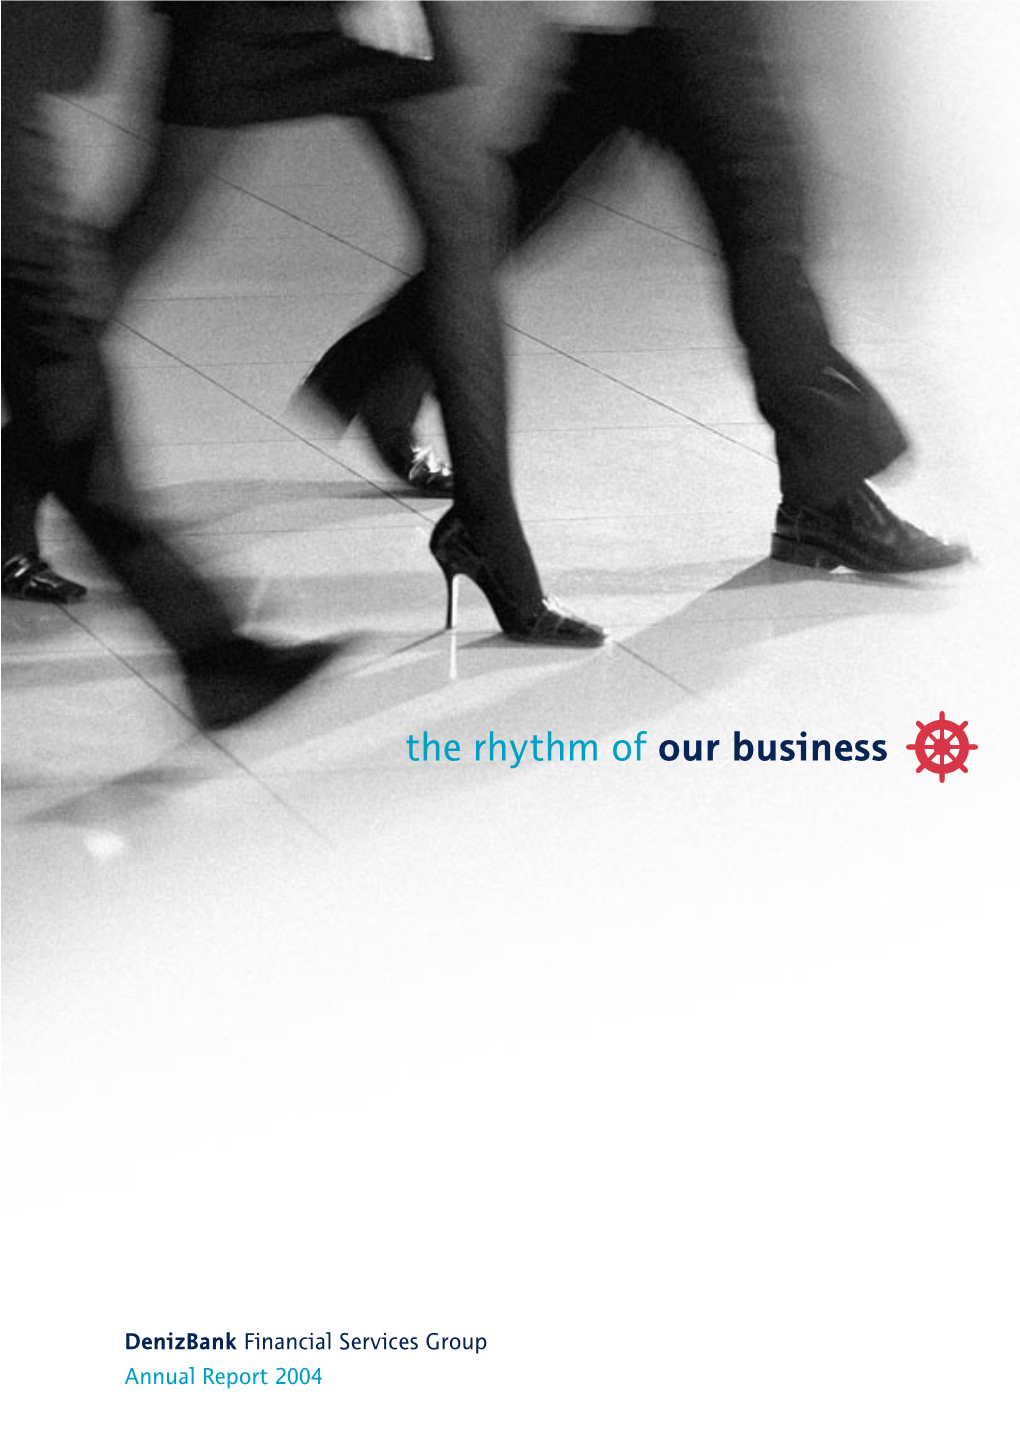 The Rhythm of Our Business